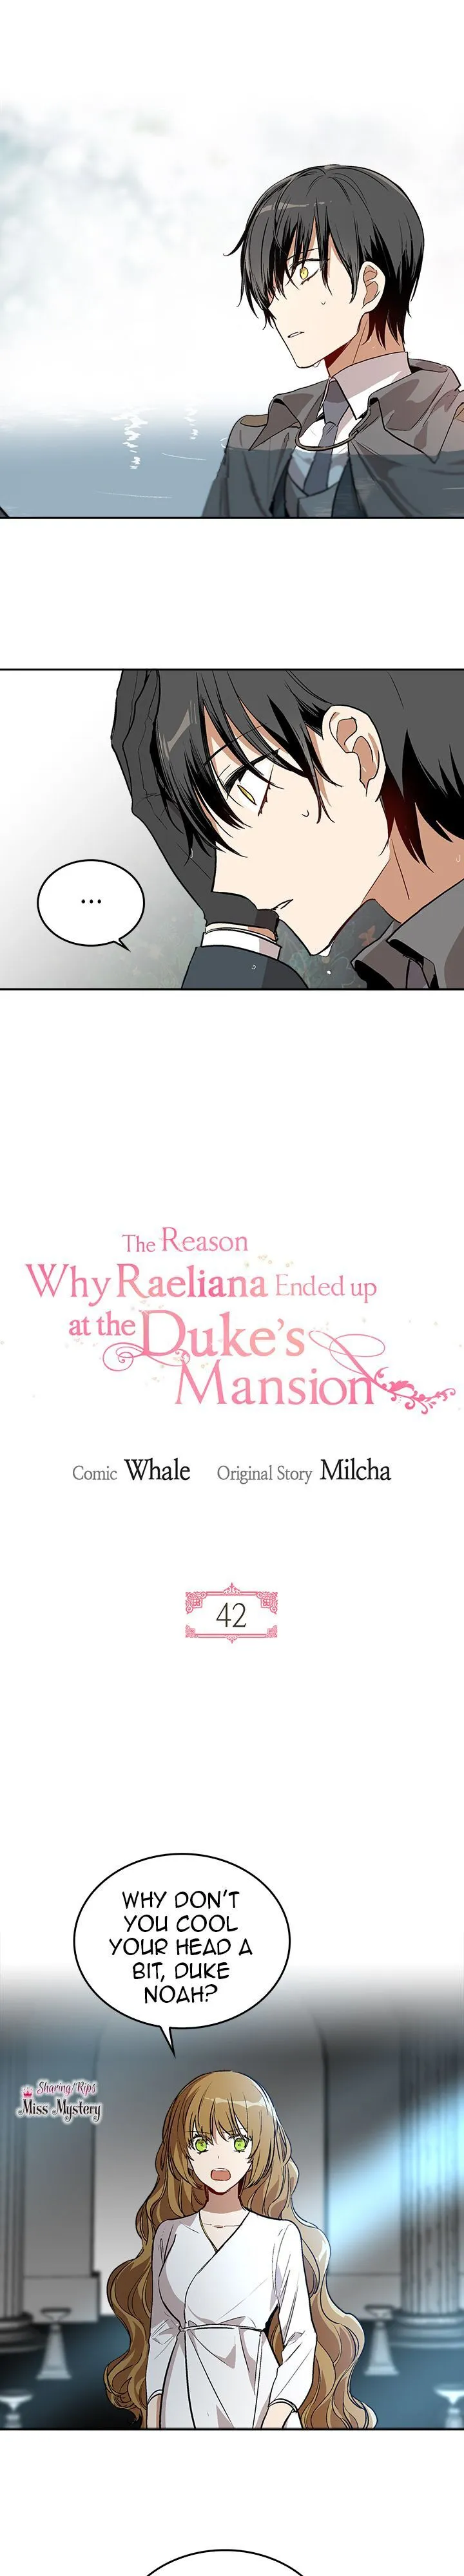 The Reason Why Raeliana Ended Up at the Duke's Mansion Chapter 042 page 1